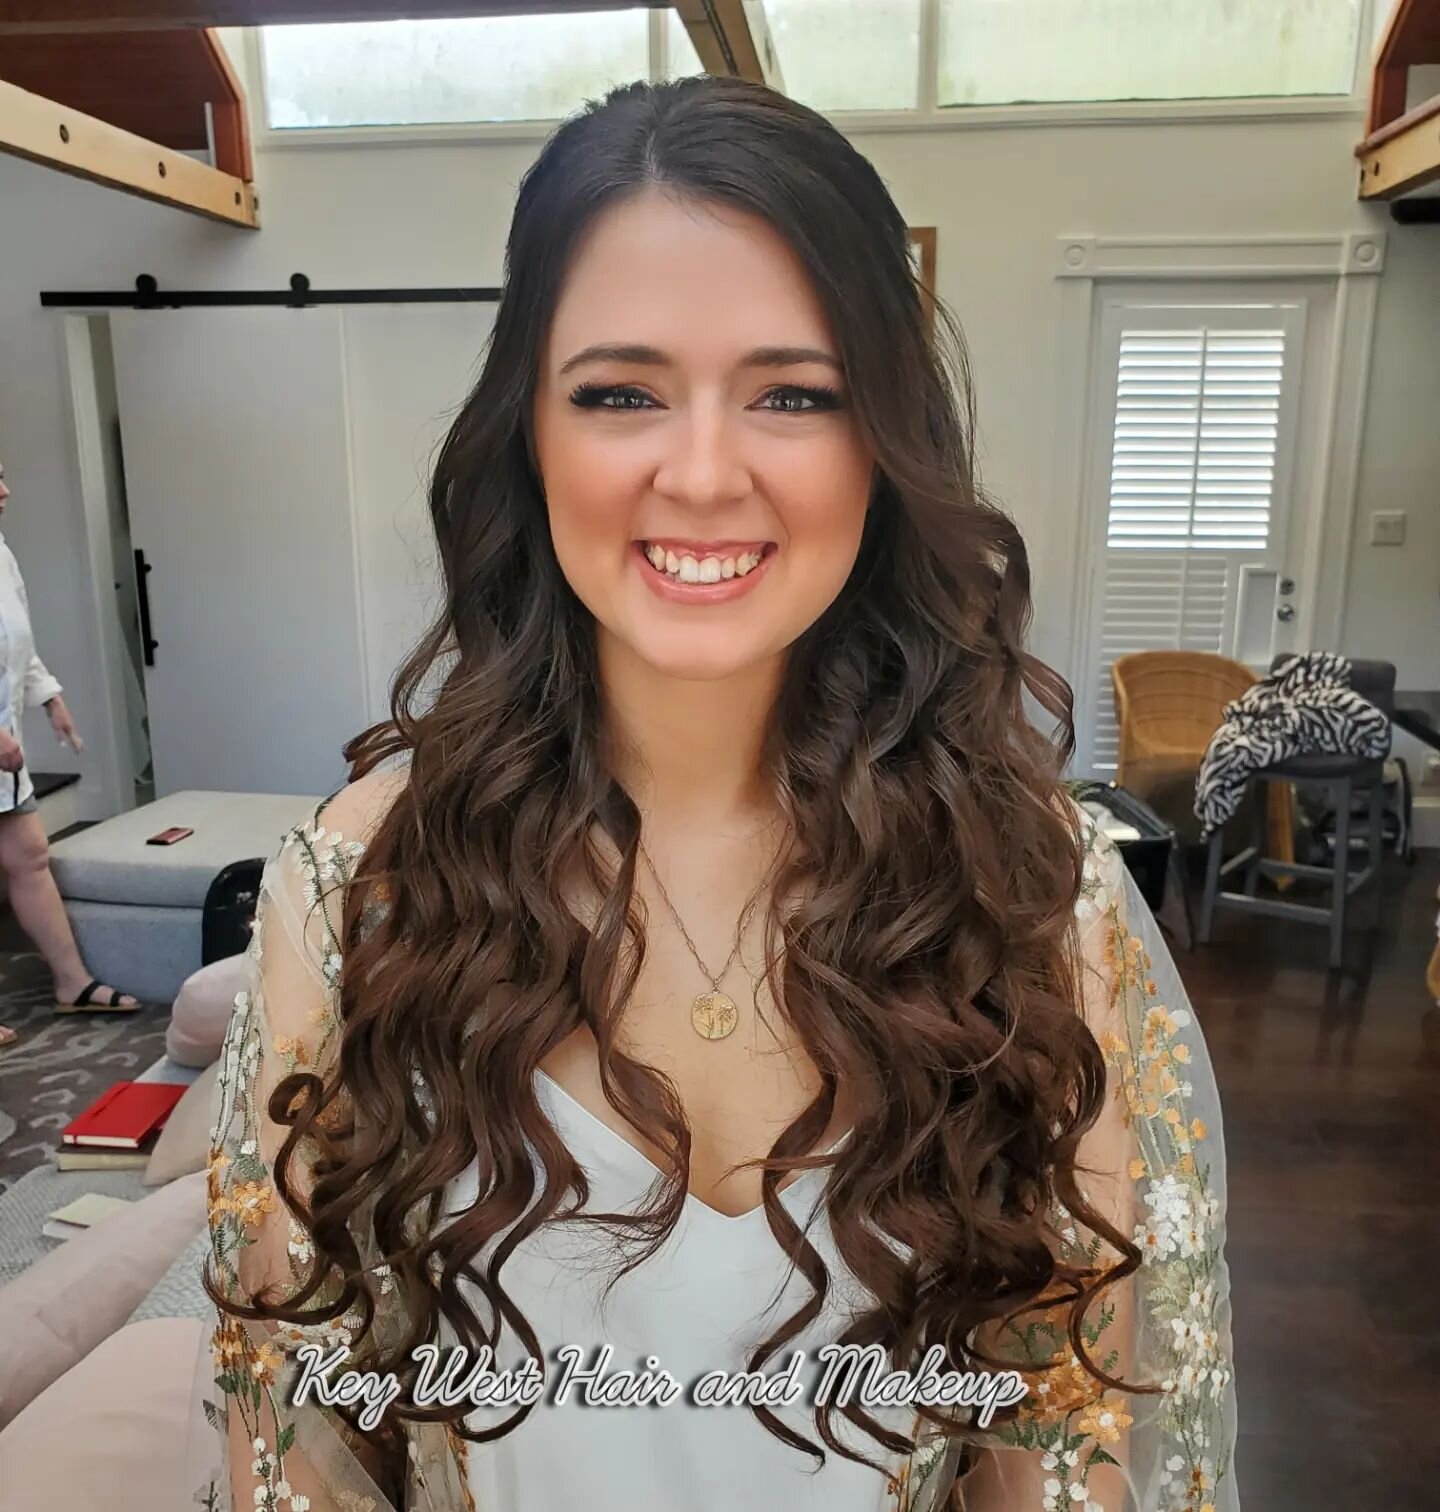 Congrats to Rebekah! Our team had a blast getting her entire wedding party ready for her big day. This gorgeous hair was enhanced with our very own Glam and Go clip in extensions that we carry in studio. 
Hair/Lorri 
Makeup/Kayla
#keywesthairandmakeu